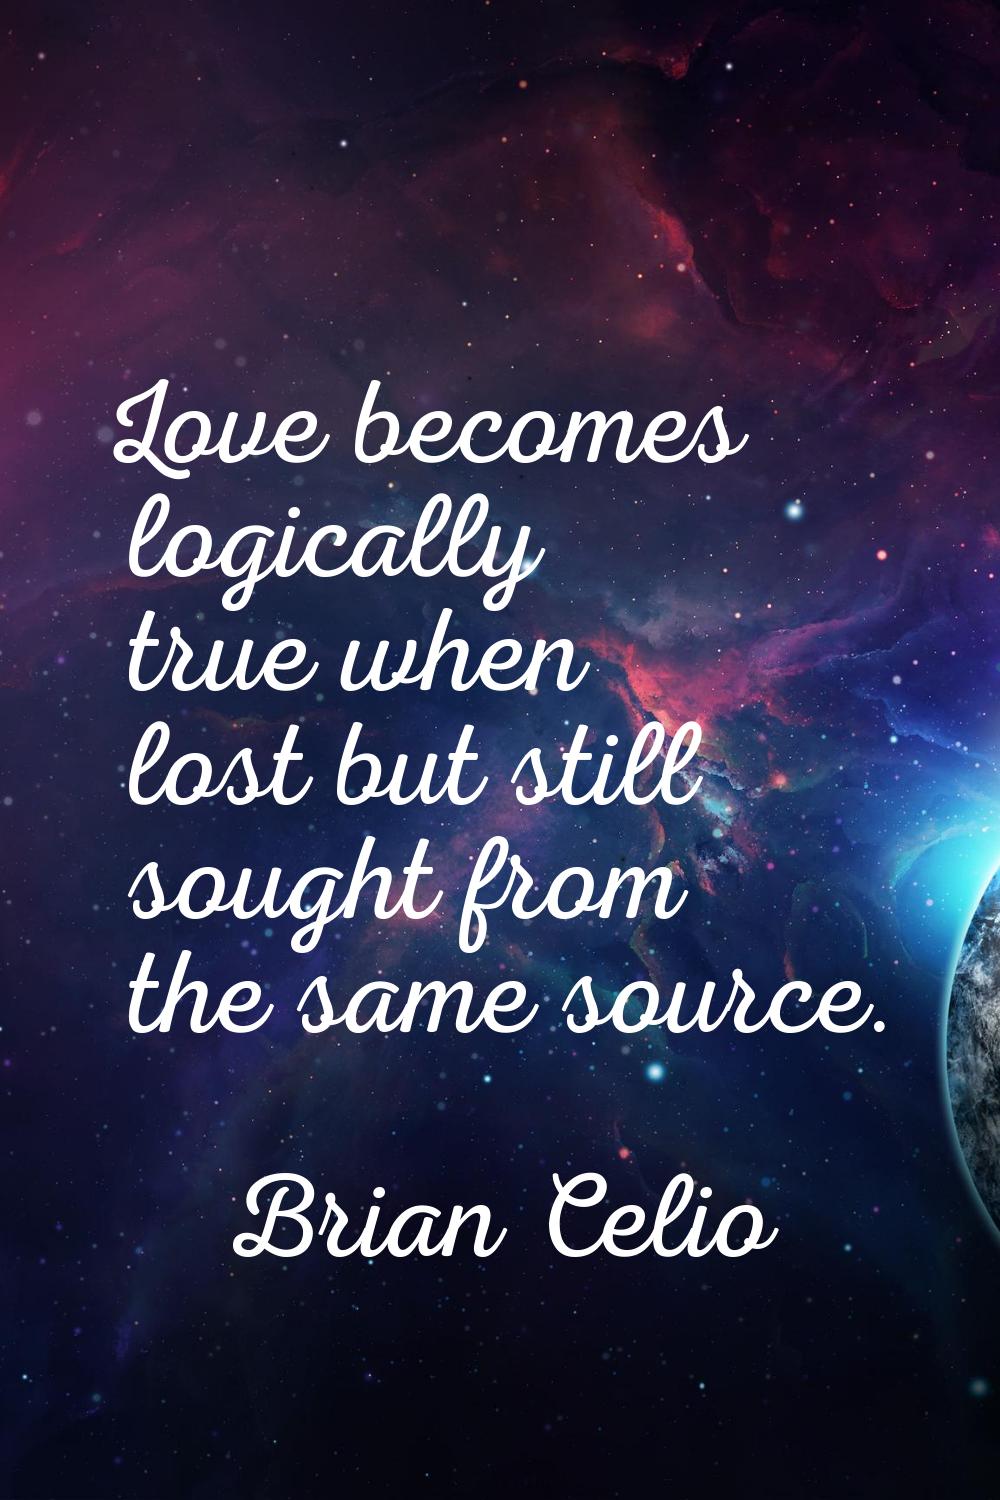 Love becomes logically true when lost but still sought from the same source.